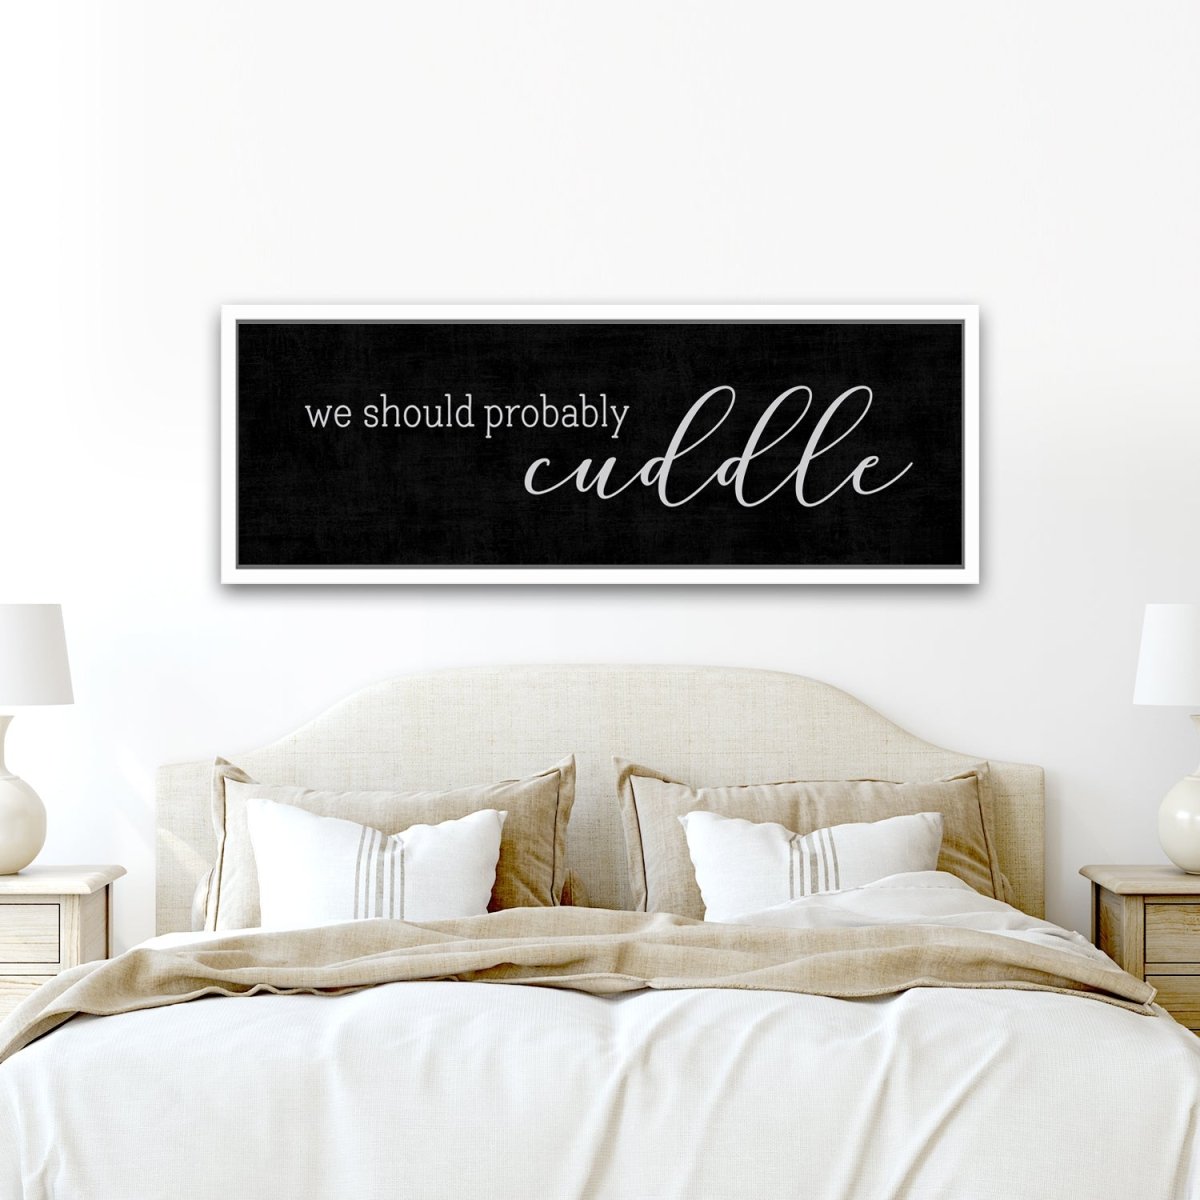 We Should Probably Cuddle Canvas Wall Art Hanging On Wall in Bedroom - Pretty Perfect Studio